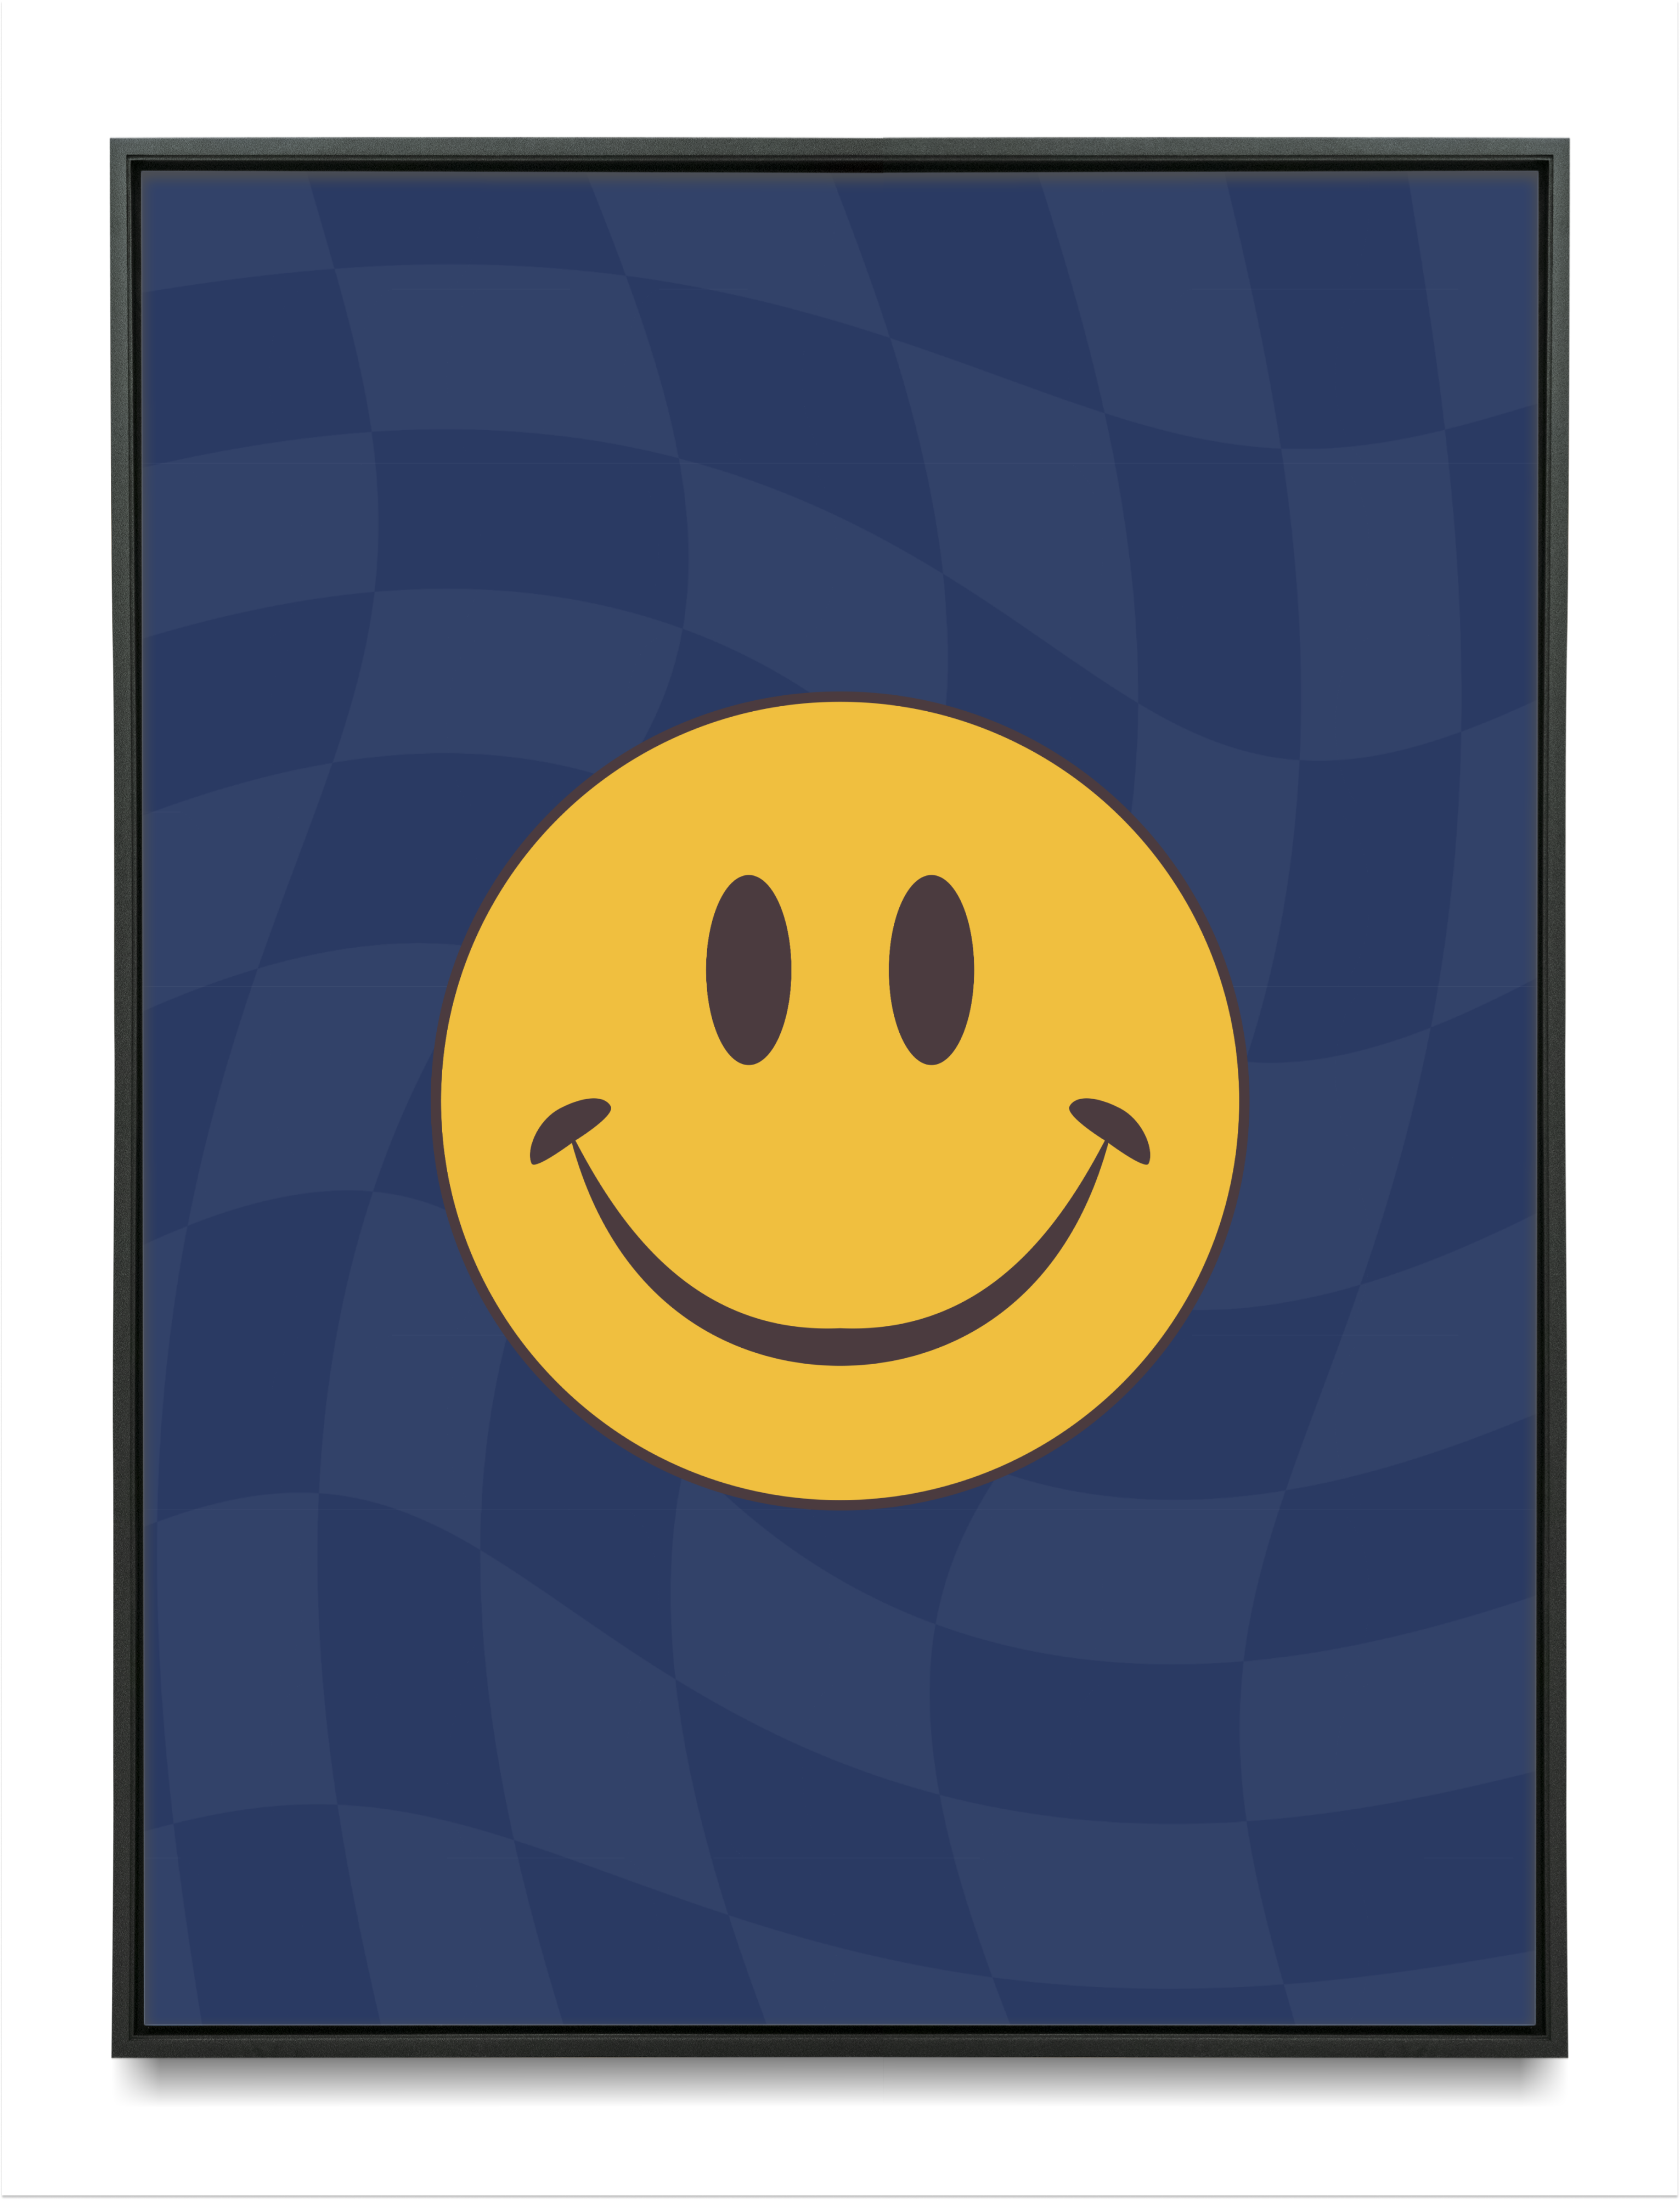 Cool Smiley Face Poster for Bedroom | Trippy Posters & Preppy Room Decor | Bedroom Aesthetic Wall Decor | UNFRAMED